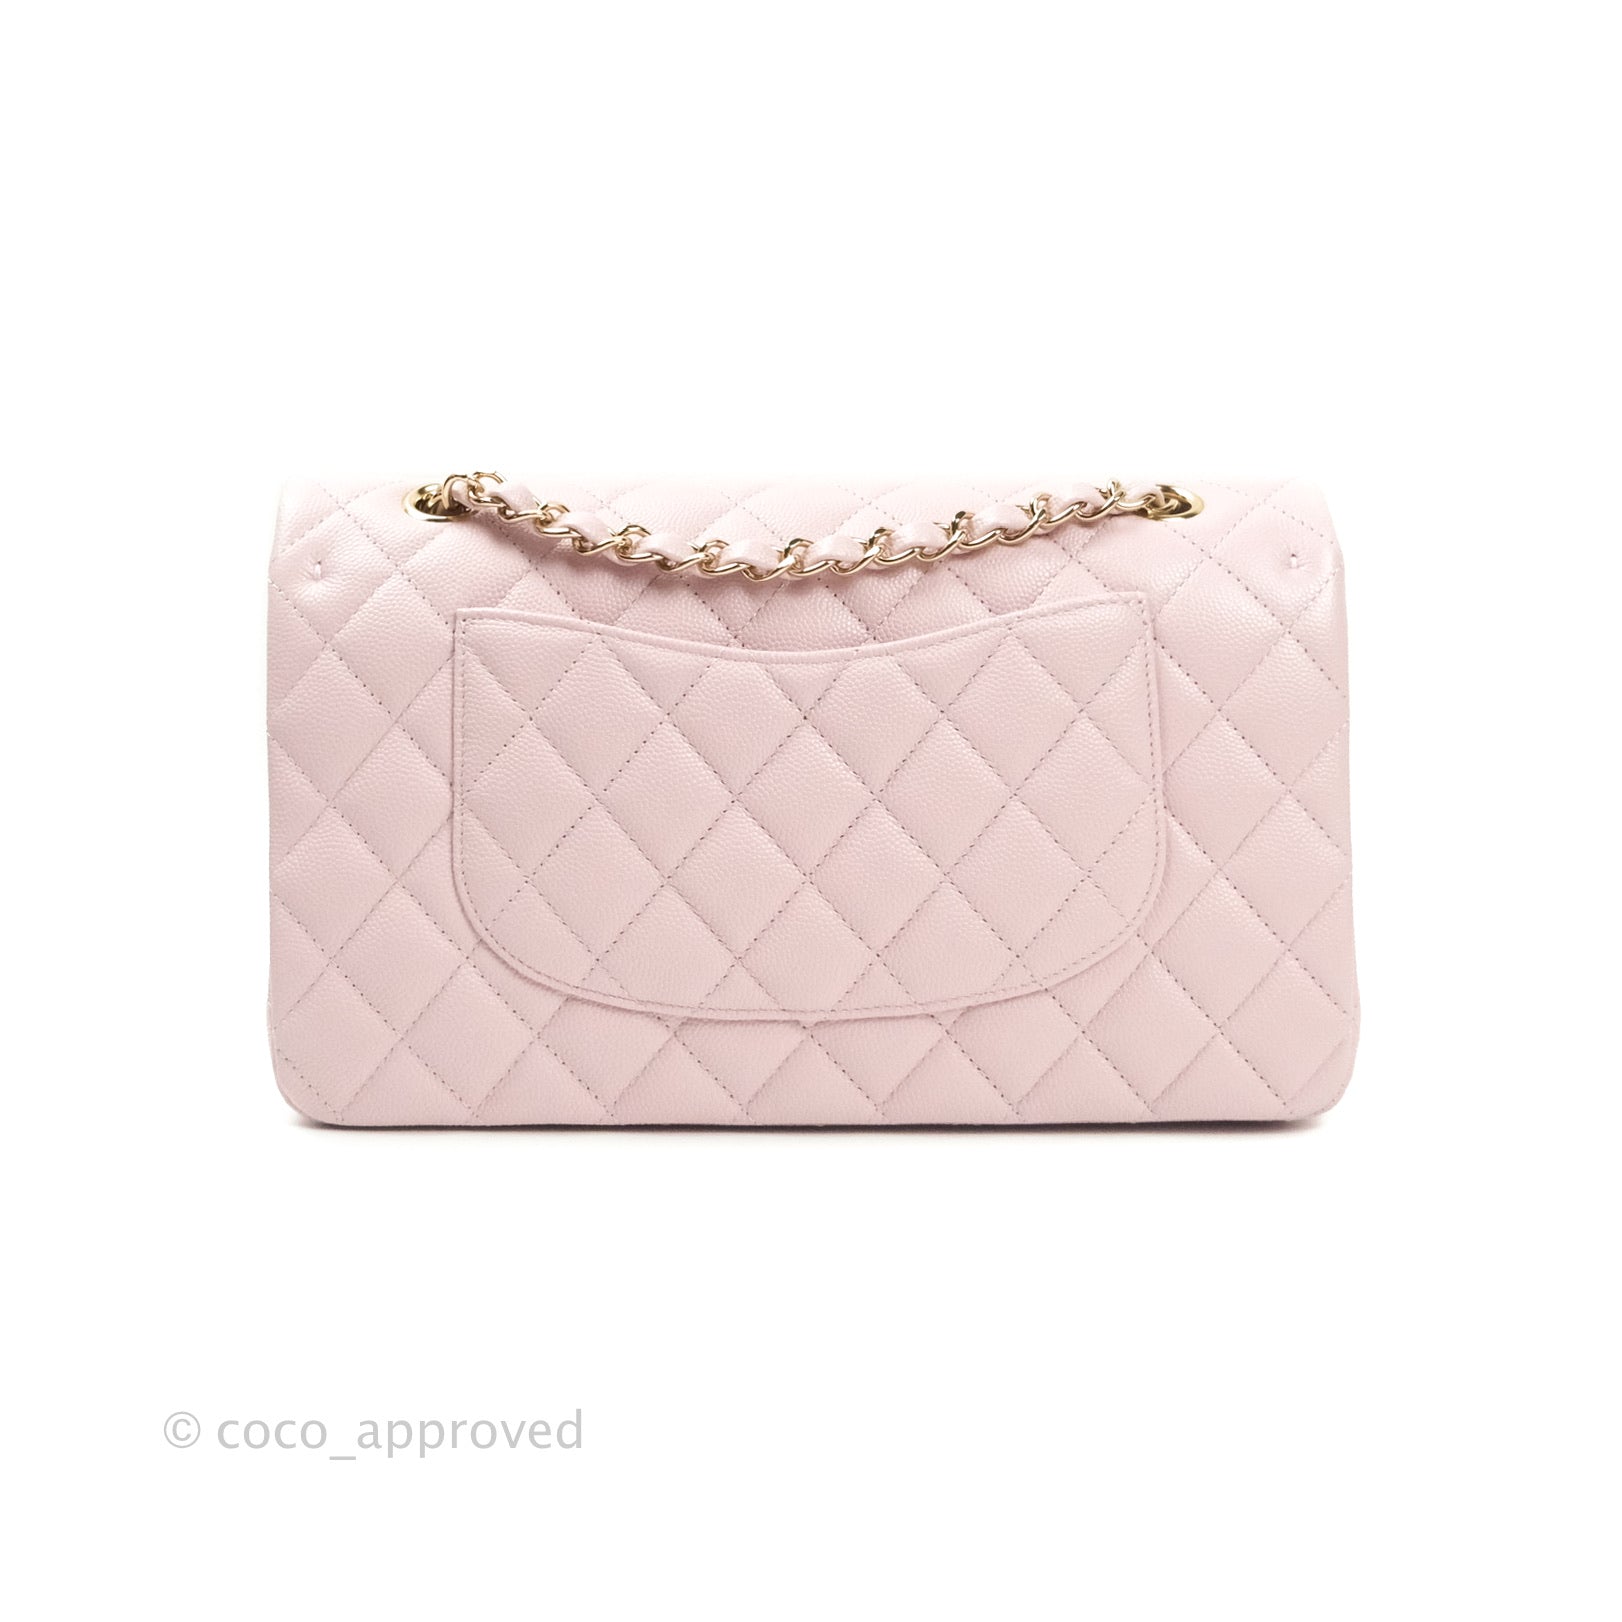 CHANEL 21S Rose Clair Lilac Pink Caviar Small Classic Flap Light